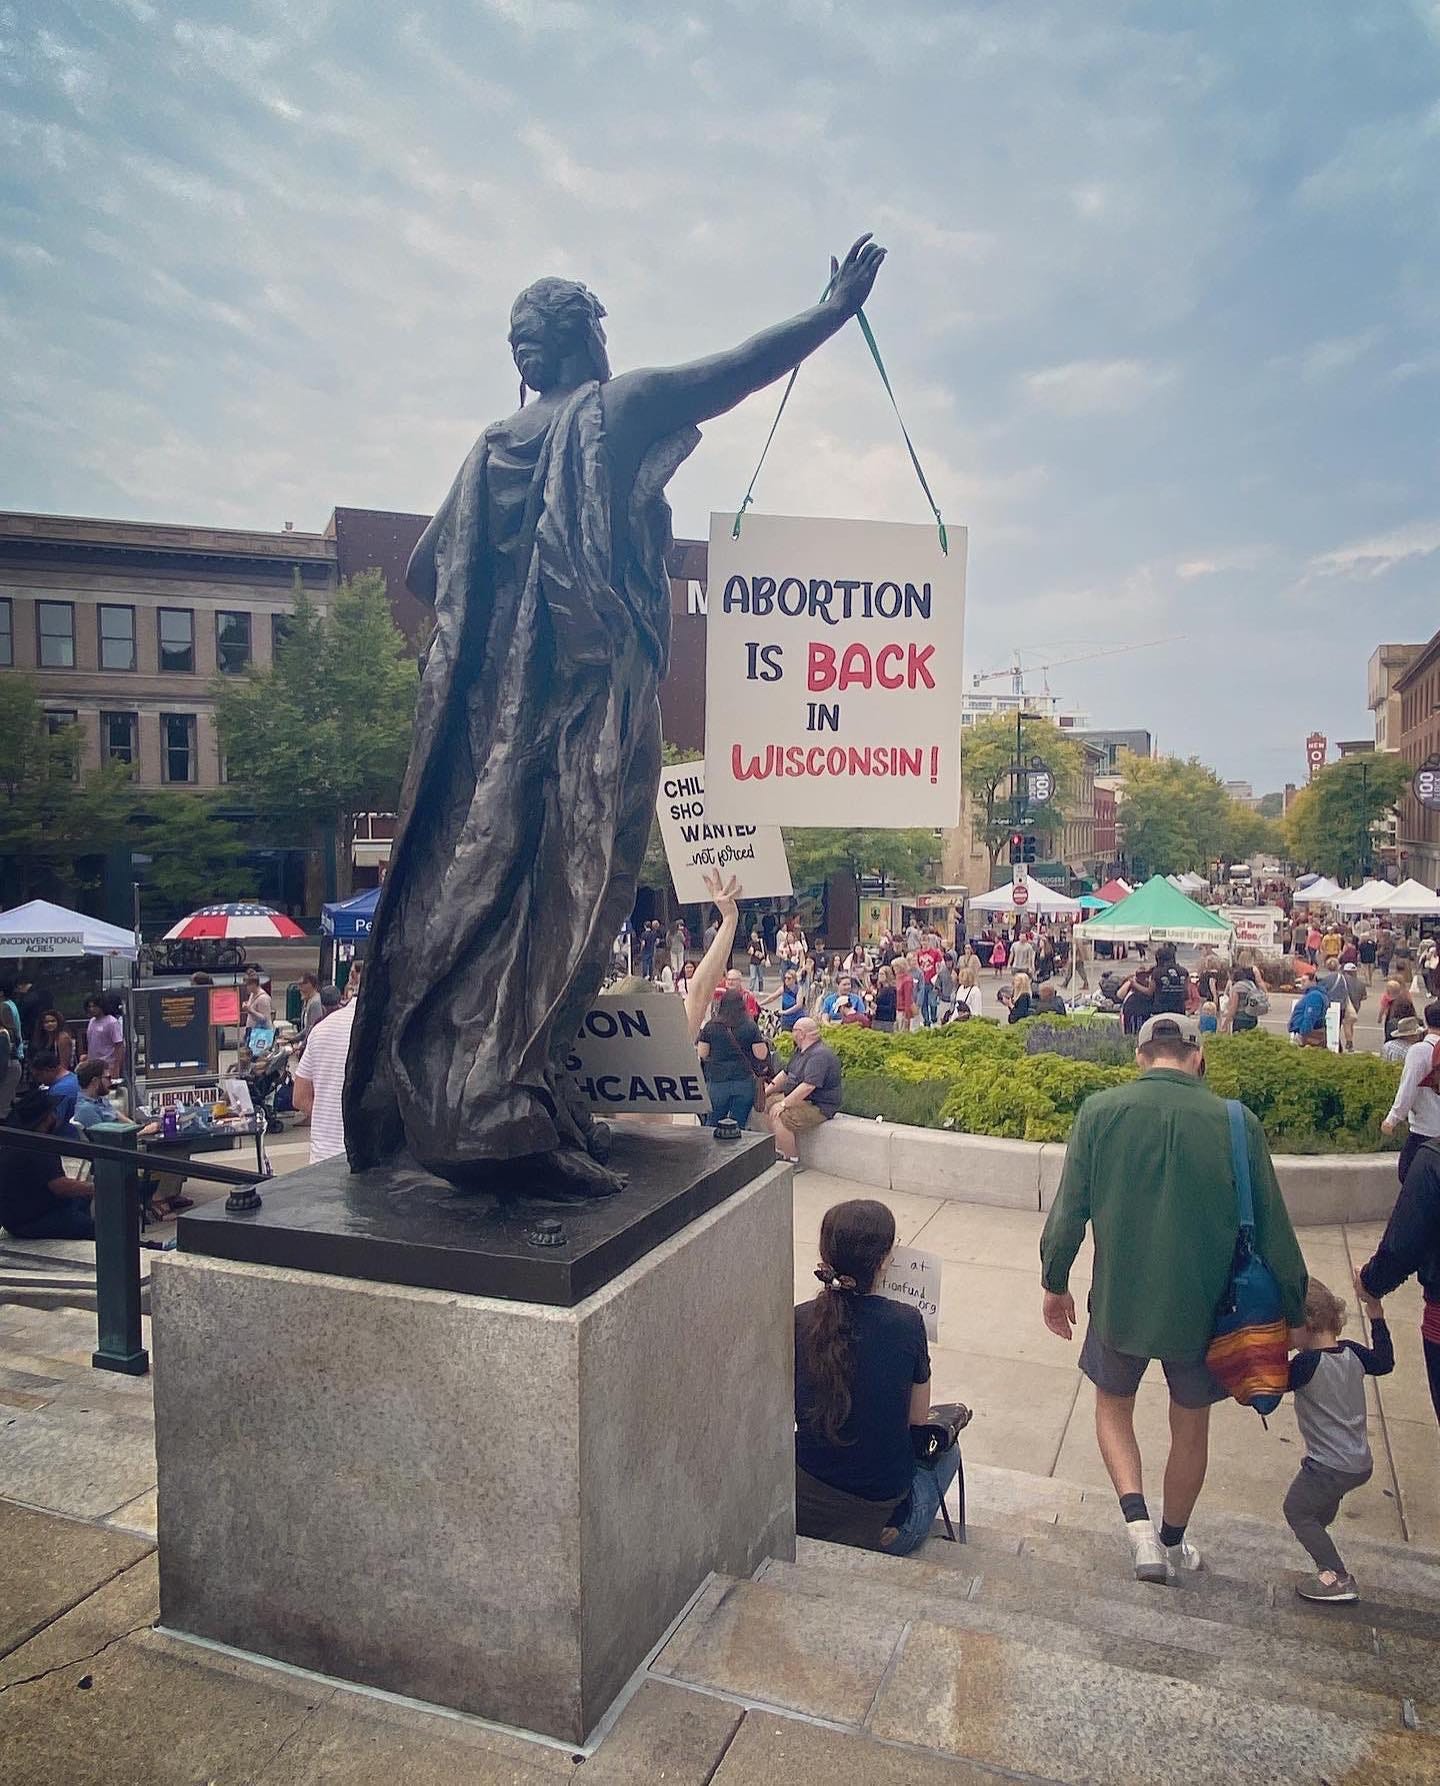 A hand-painted sign hangs from the outstretched hand of a bronze statue of a woman overlooking a crowded State Street in Madison. The sign reads, "Abortion is back in Wisconsin!"